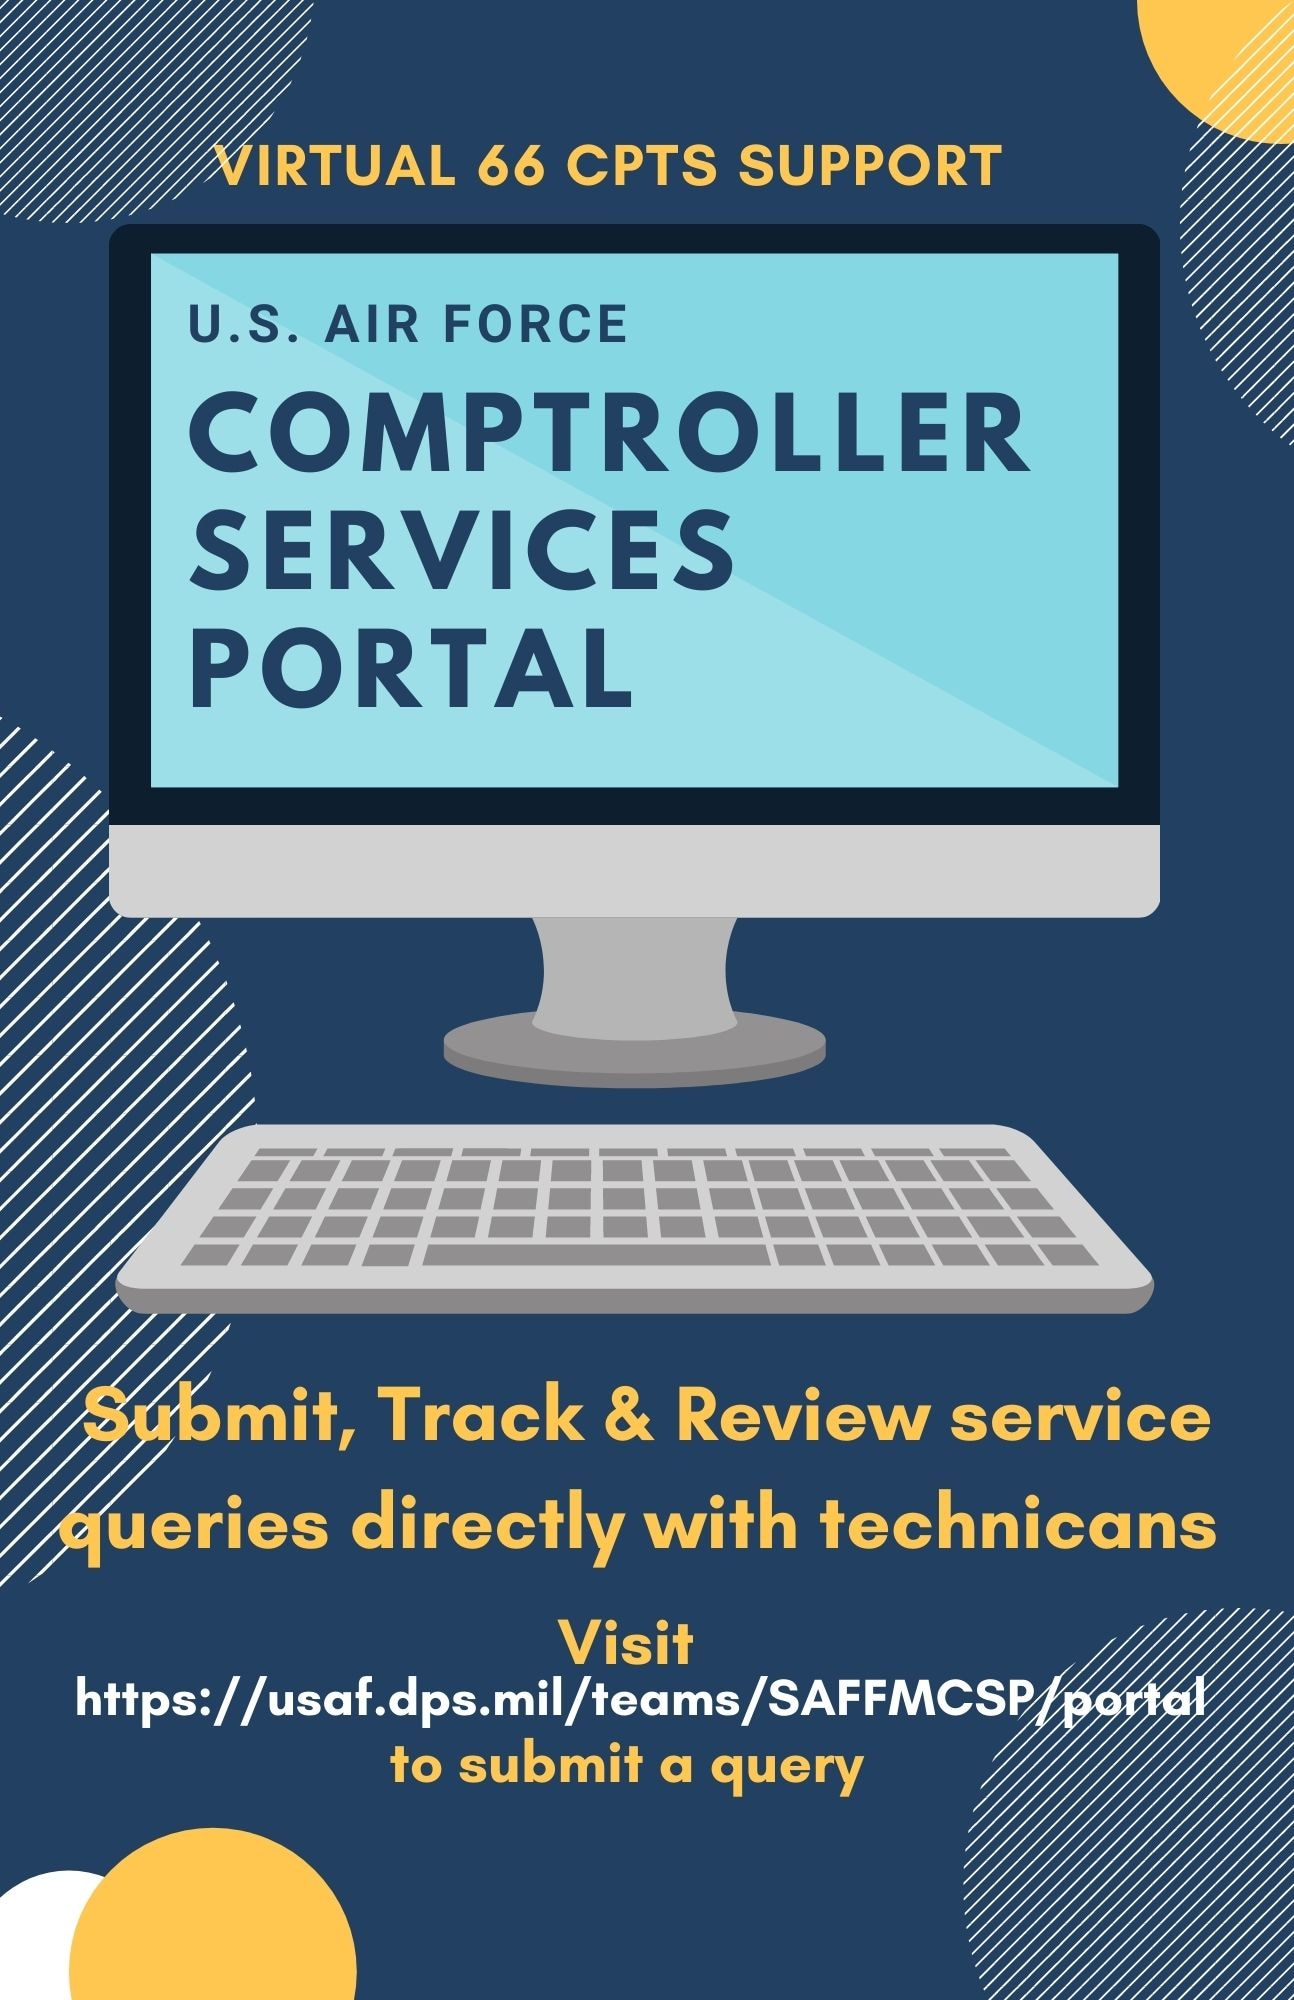 The 66th Comptroller Squadron at Hanscom Air Force Base, Mass., support finance customers through the Air Force Comptroller Services Portal. Customers can submit, track, and review queries through the portal and will be notified every time a technician works their request. (U.S. Air Force graphic by Lauren Russell)